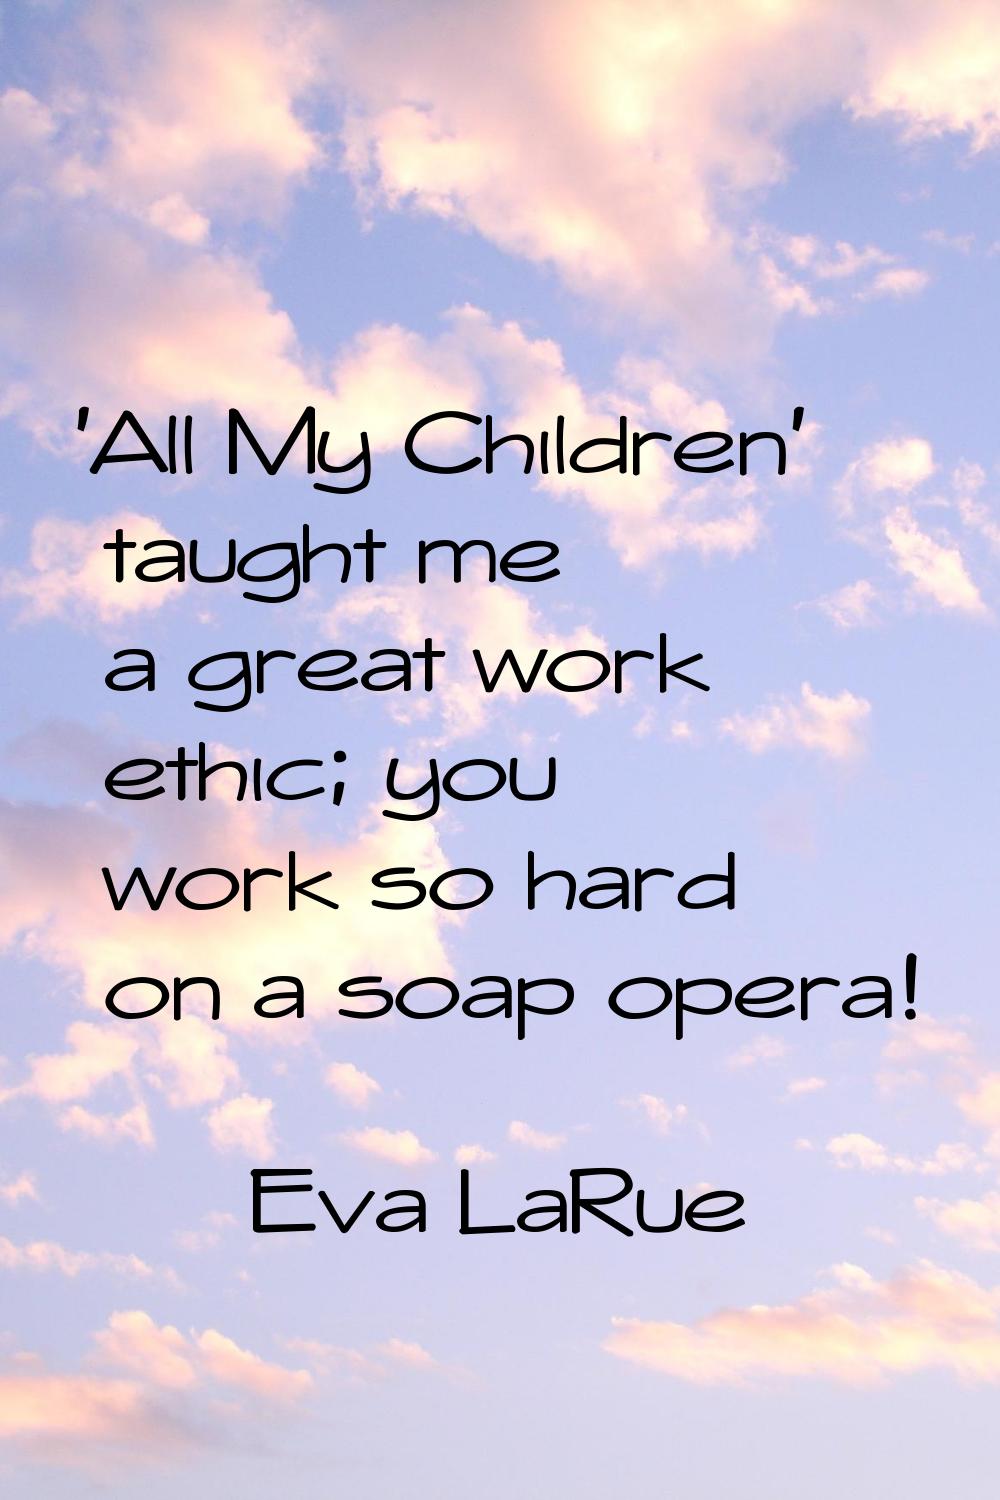 'All My Children' taught me a great work ethic; you work so hard on a soap opera!